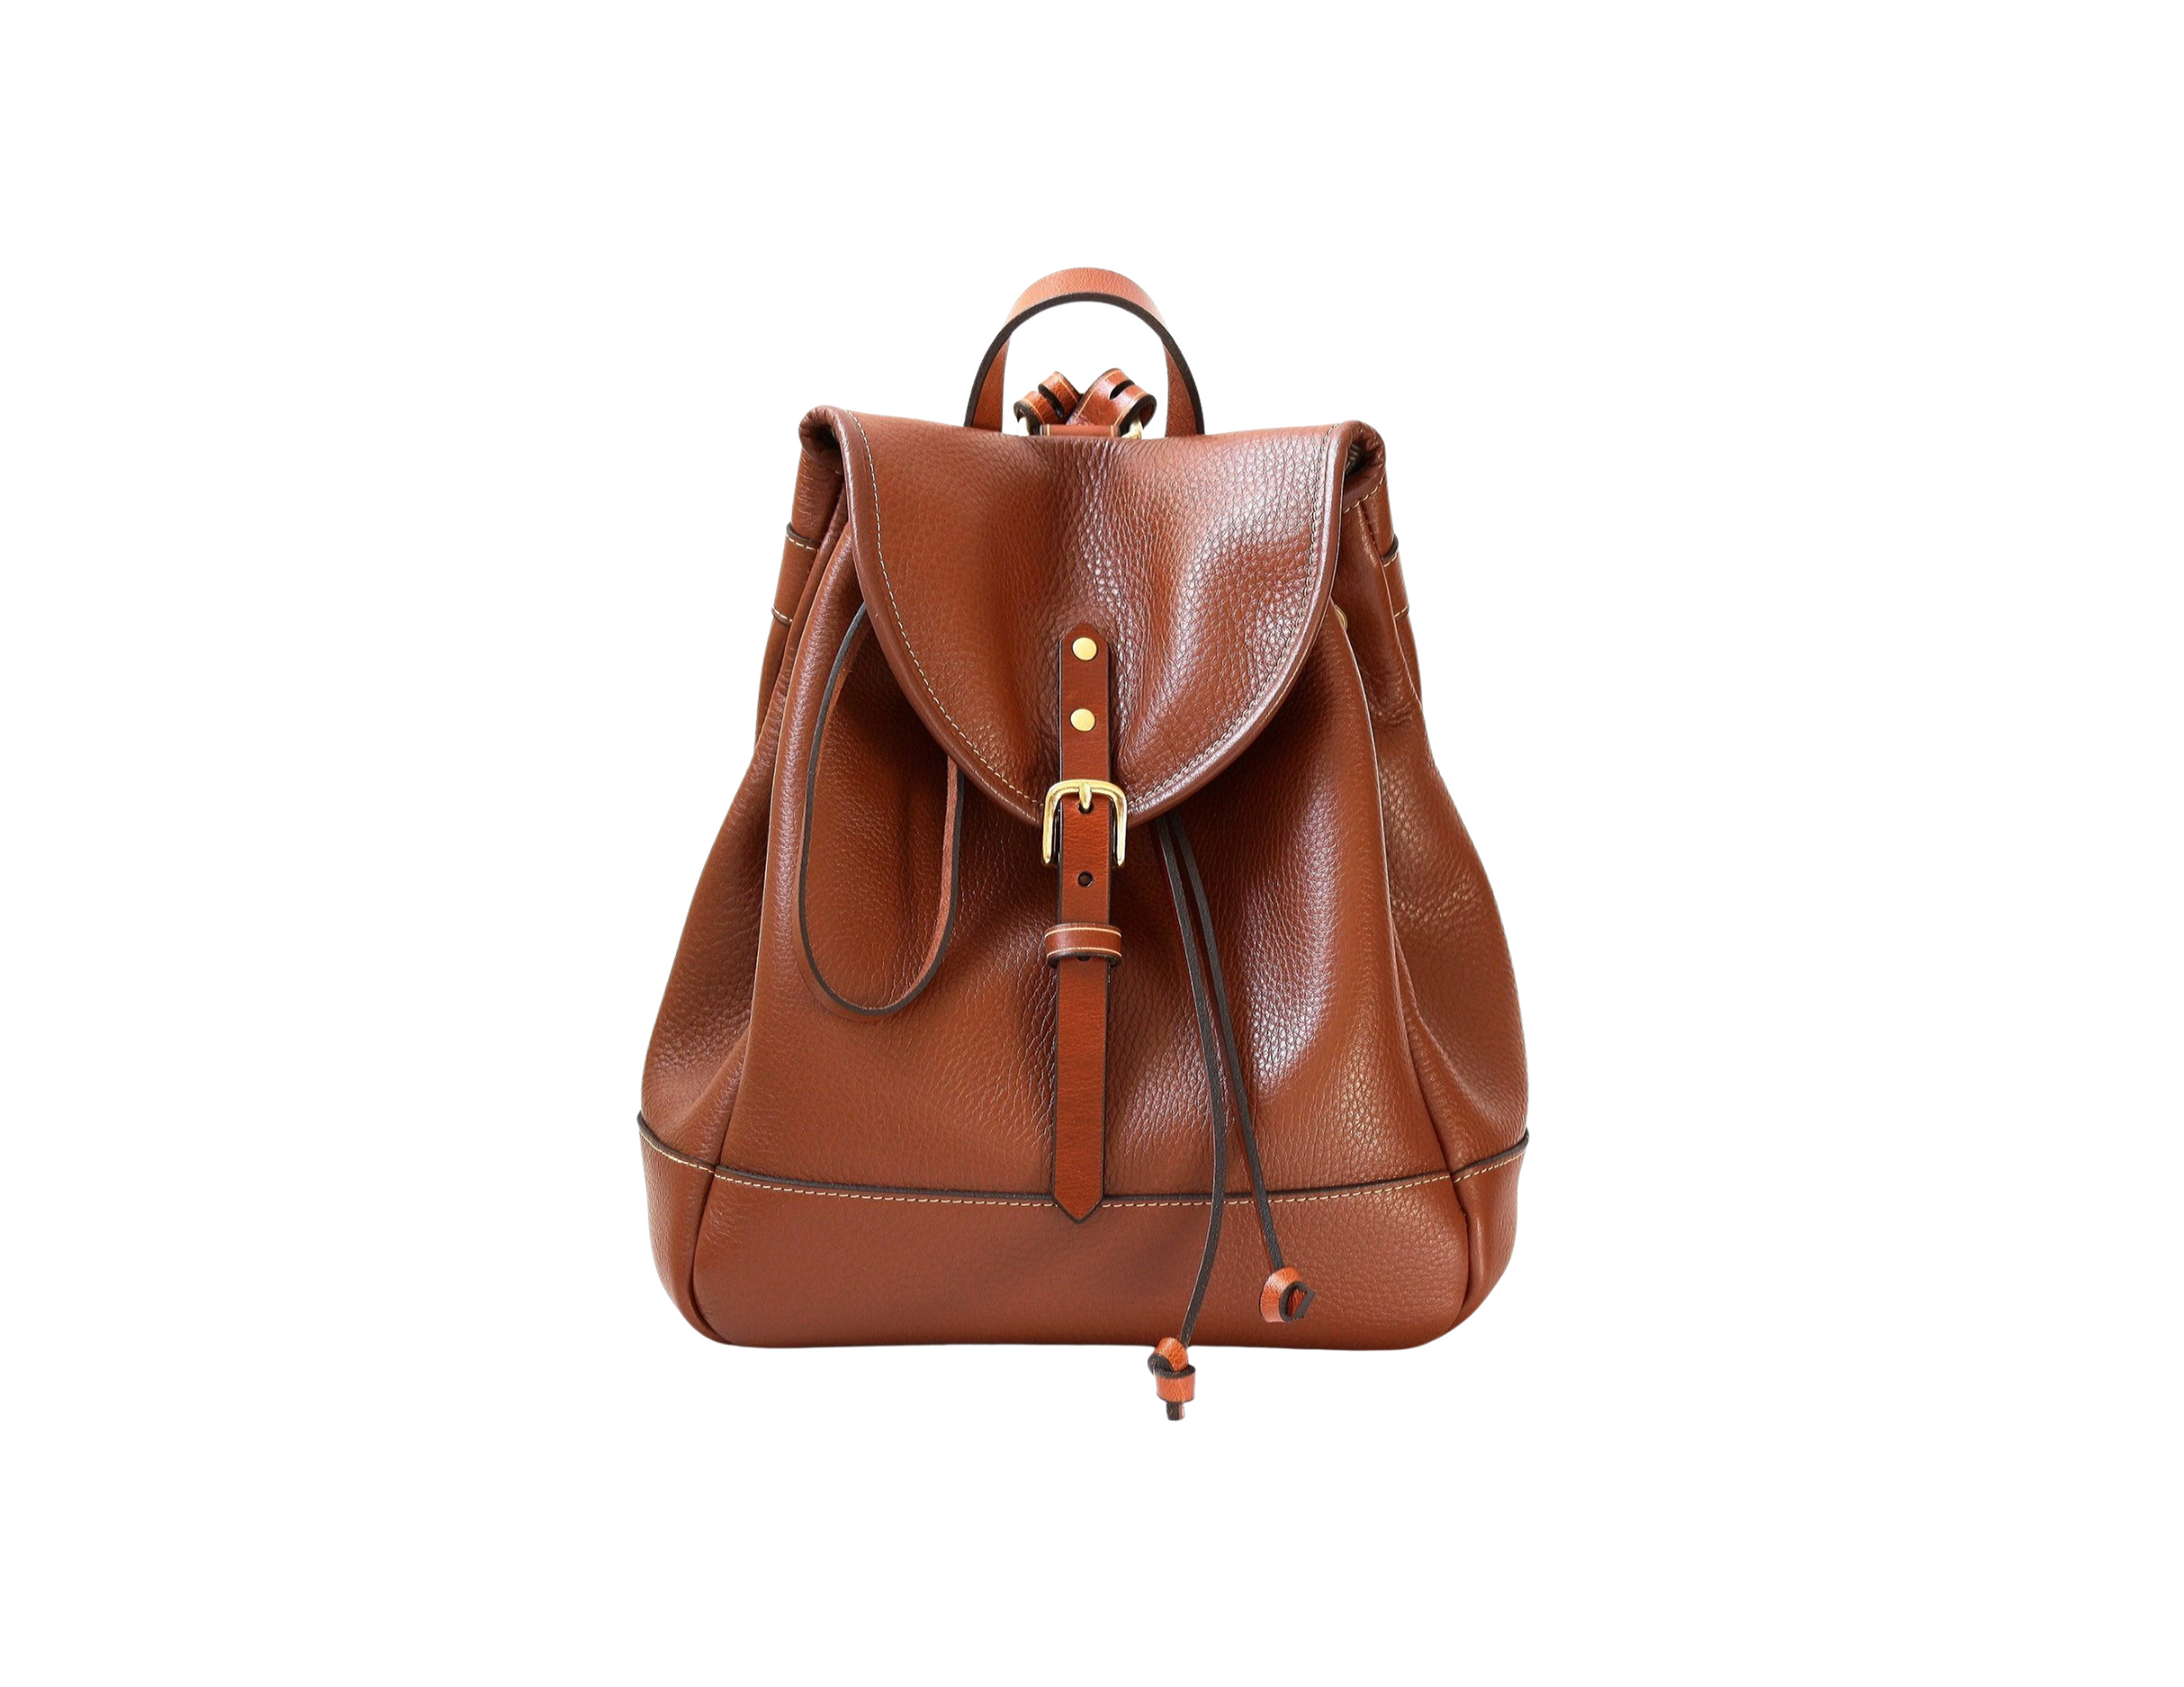 Brown leather backpack handmade in Montreal Canada By luxury leather goods designer Kimberly Fletcher